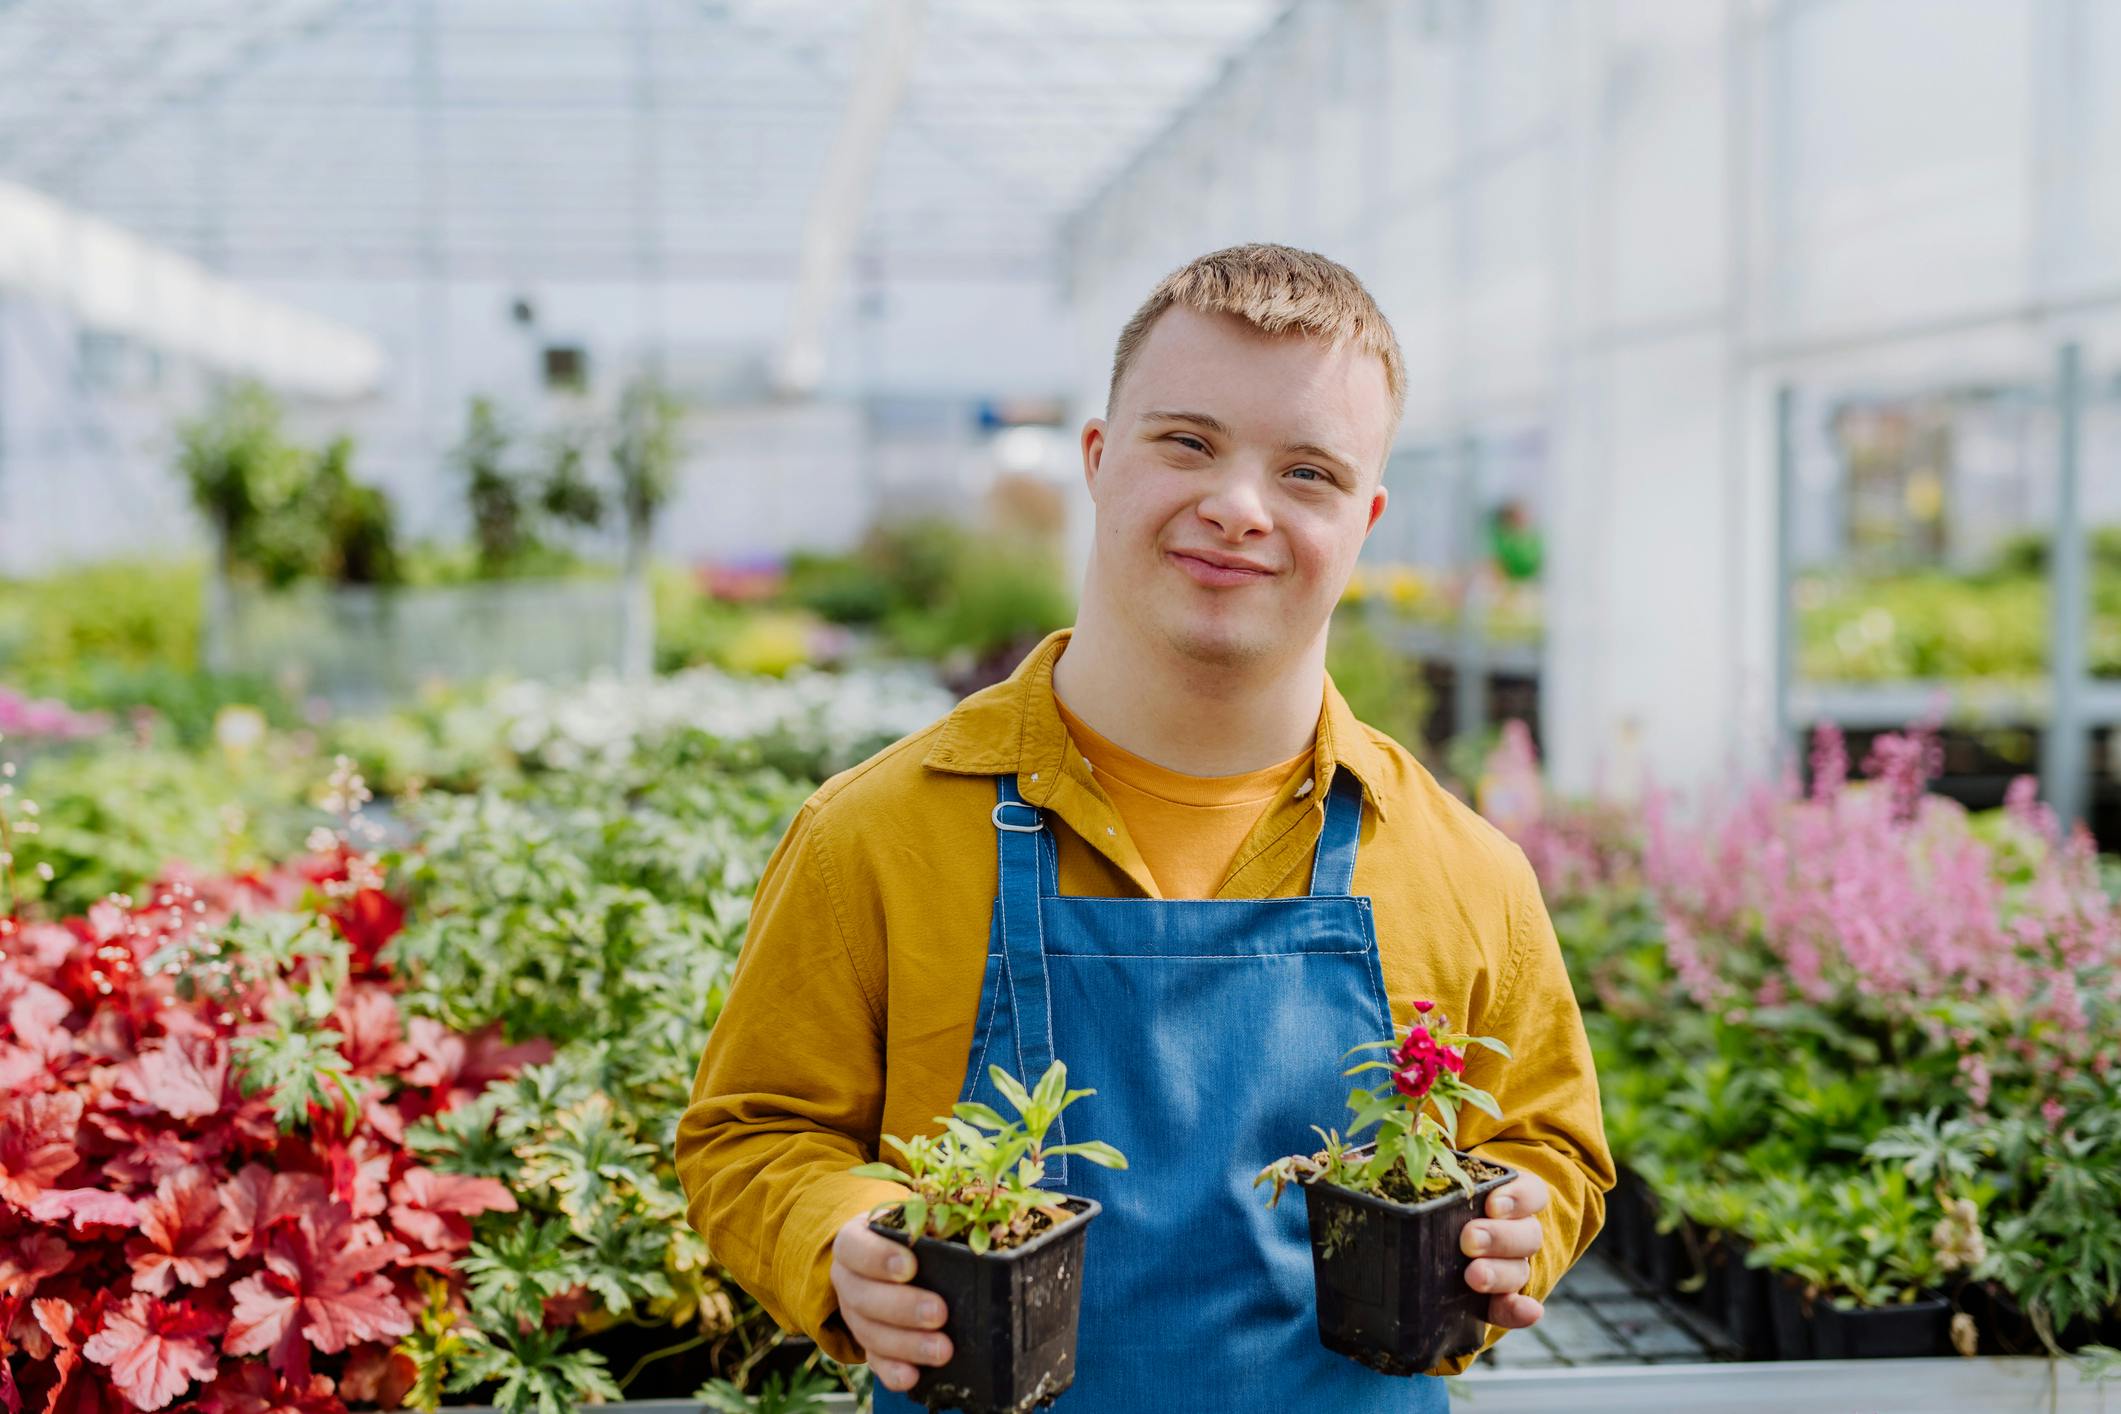 Image of a young male working in an outdoor nursery. He is wearing a bright yellow shirt with a blue apron. He is holding two small pot plants and is surrounded by brightly coloured plants.